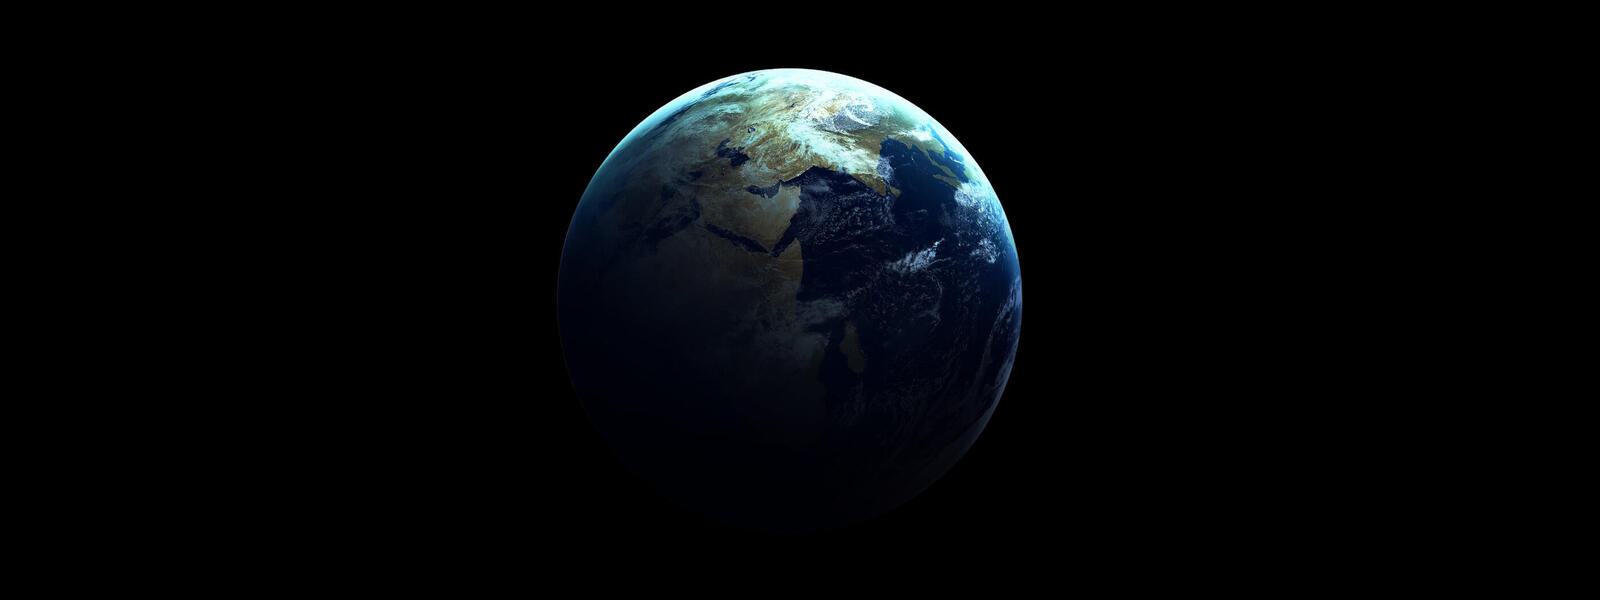 View of the earth in darkness